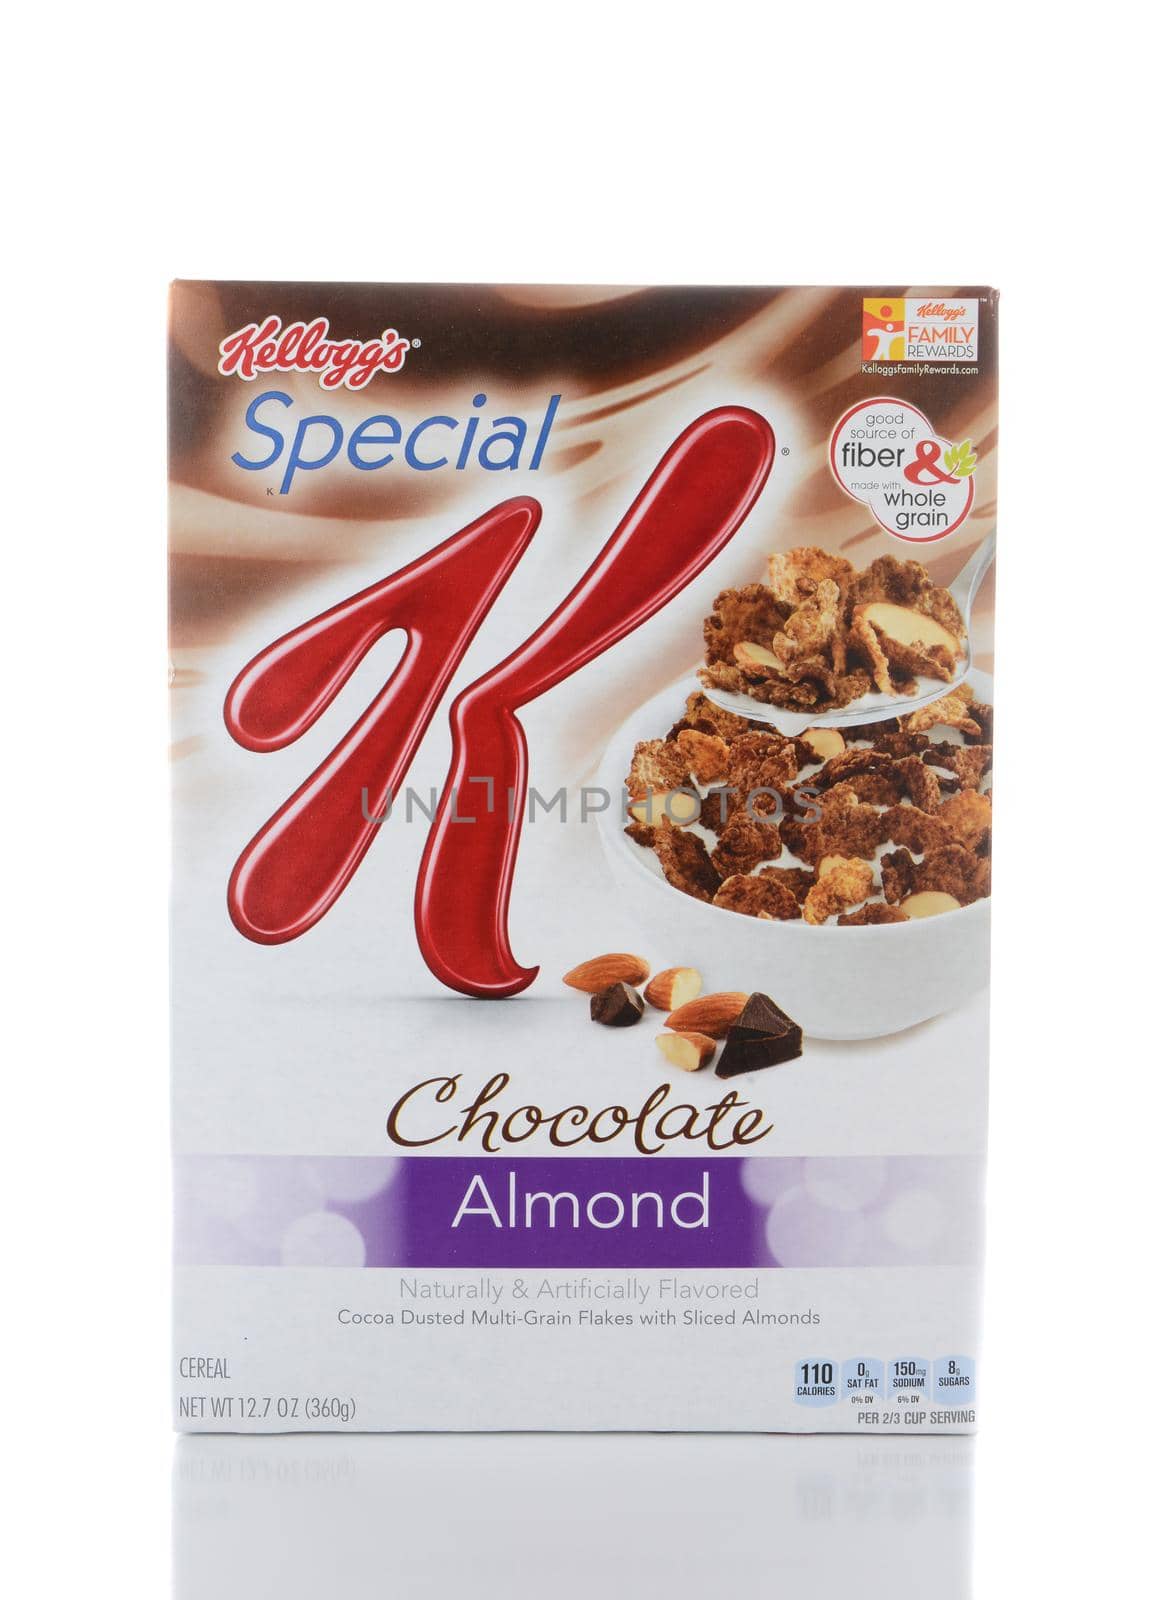 IRVINE, CA - JUNE 2, 2015: A box of Special K Chocolate Almond Cereal. Special K cereals, from Kellogg's of Battle Creek, Michigan, are  a low-fat cereal that can be eaten to help one lose weight. 